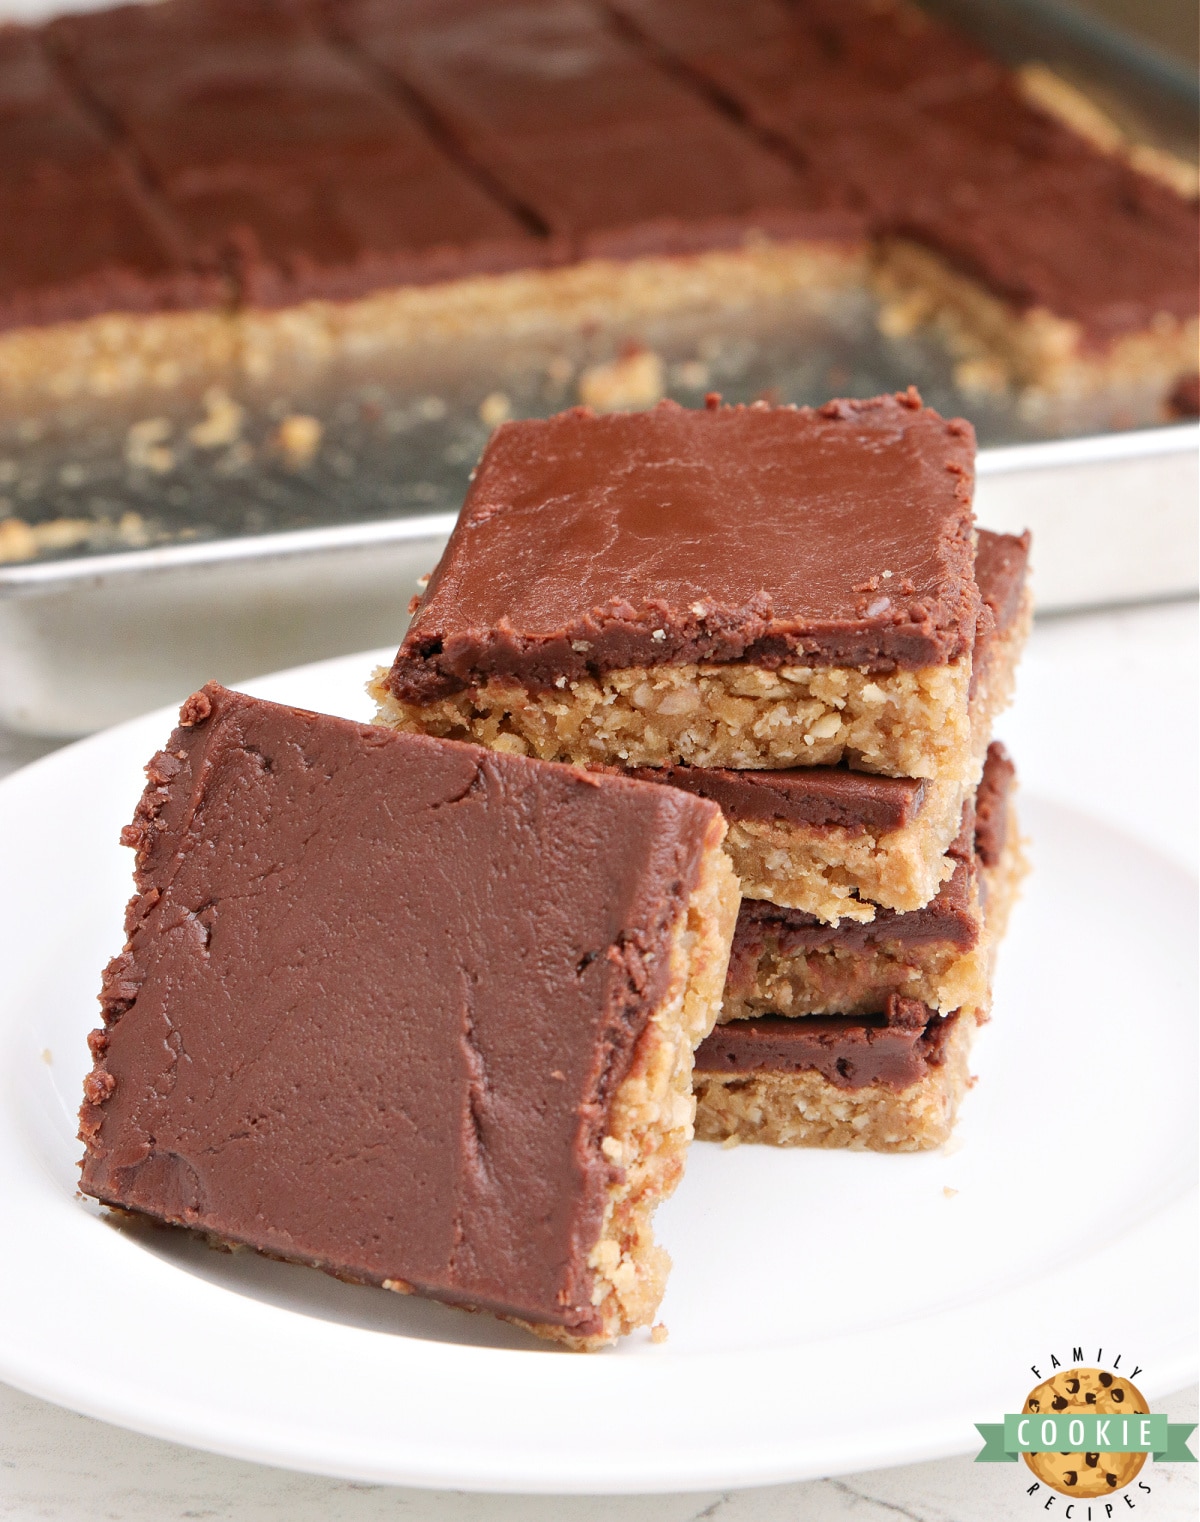 Peanut butter bars with chocolate frosting